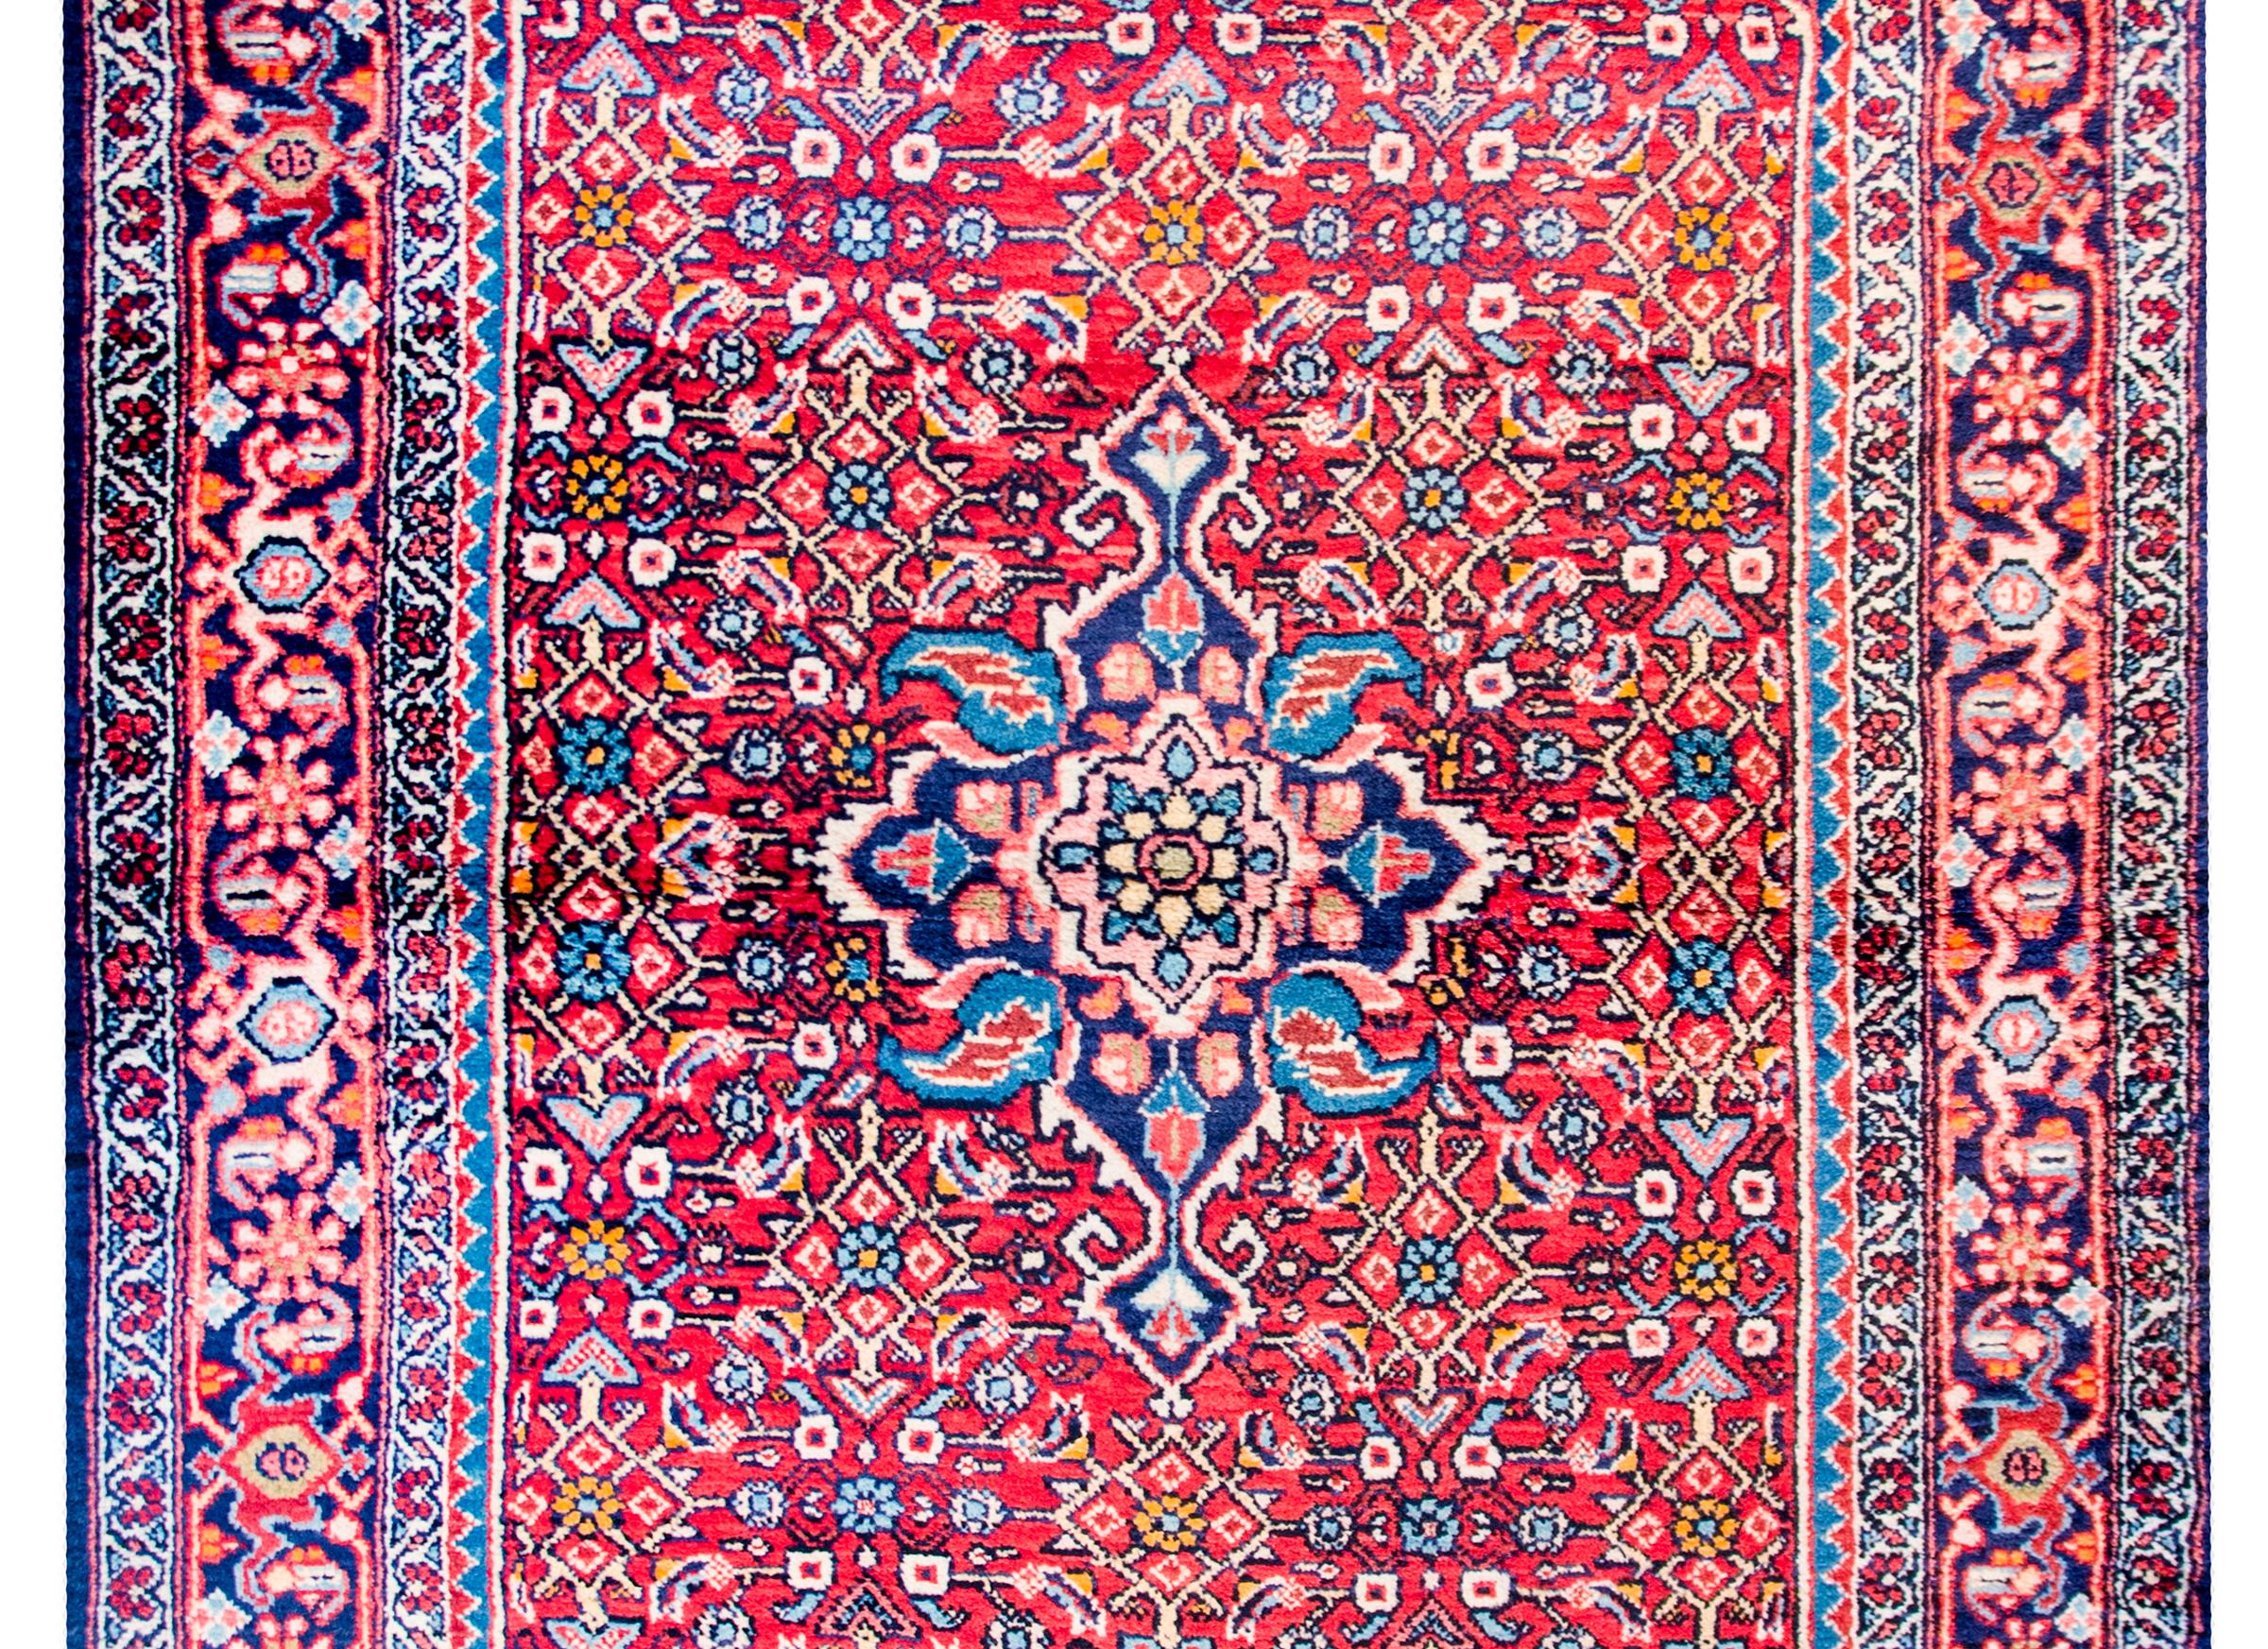 A wonderful early 20th century Persian Hamadan rug with a floral medallion woven in light and dark indigo, pink, and crimson amidst a field of flowers and trellis designs on a crimson background. The border is complex with a large-scale stylized